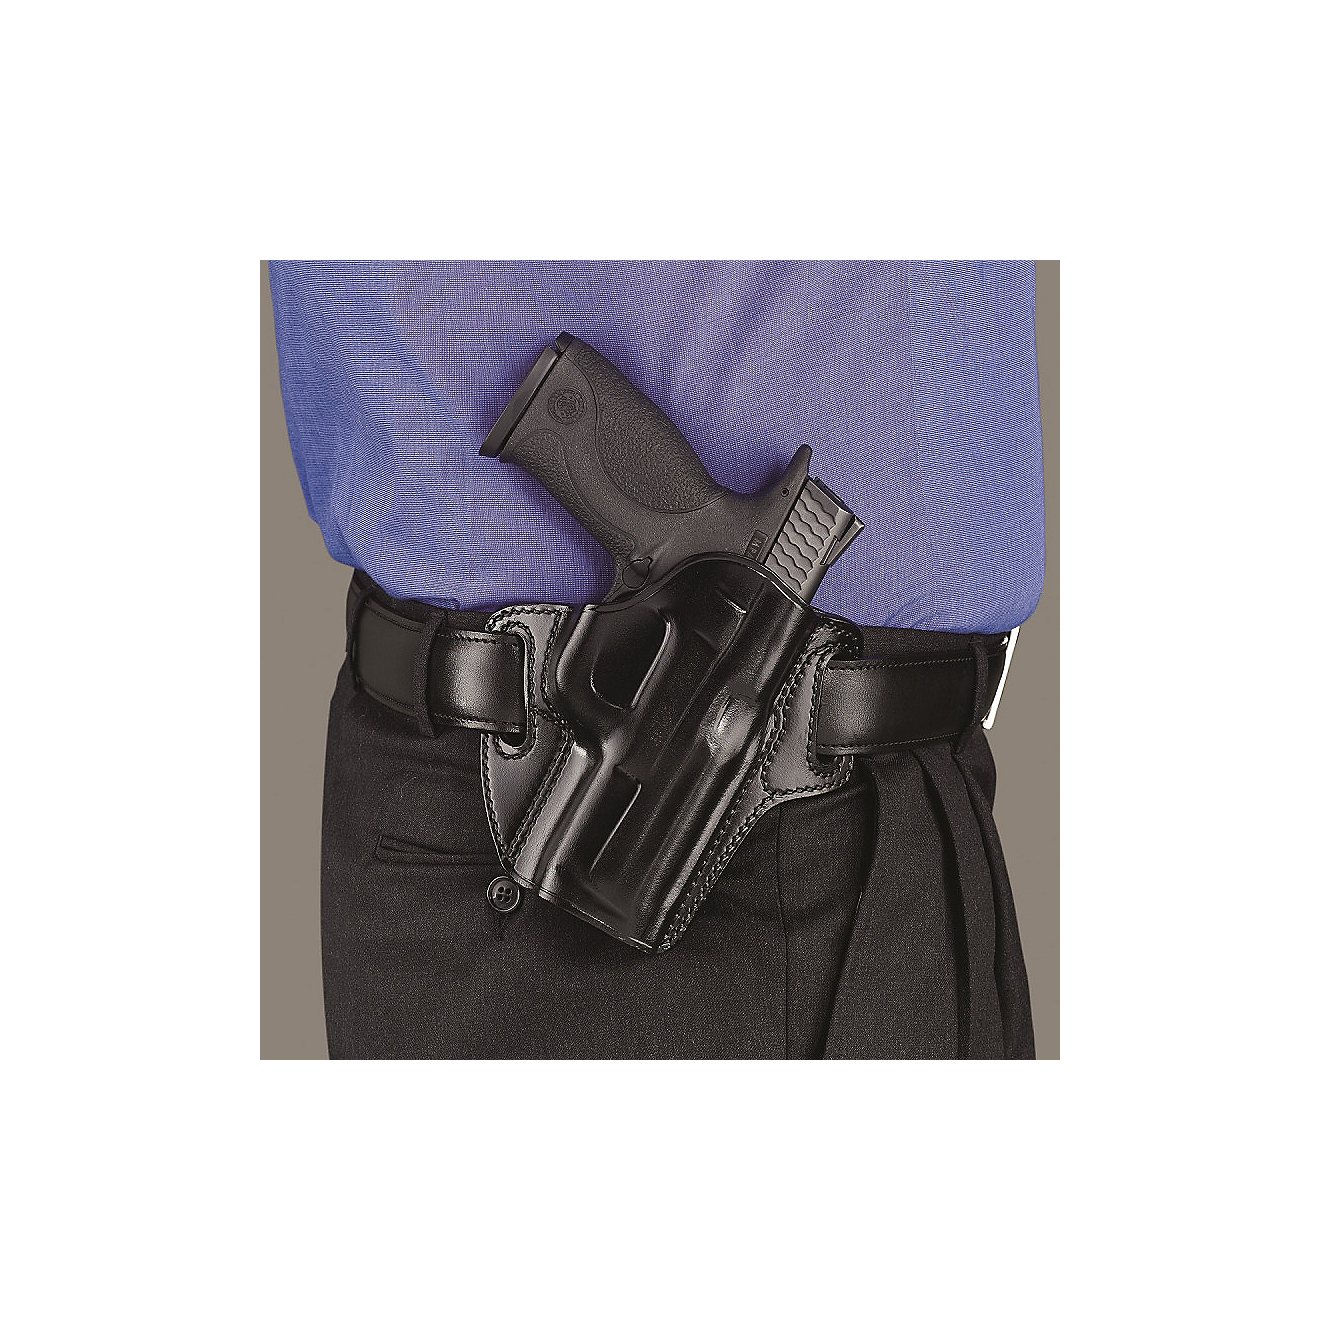 Galco Concealable Auto AMTHB/Colt/Kimber/Para-Ordnance Concealment Holster                                                       - view number 1